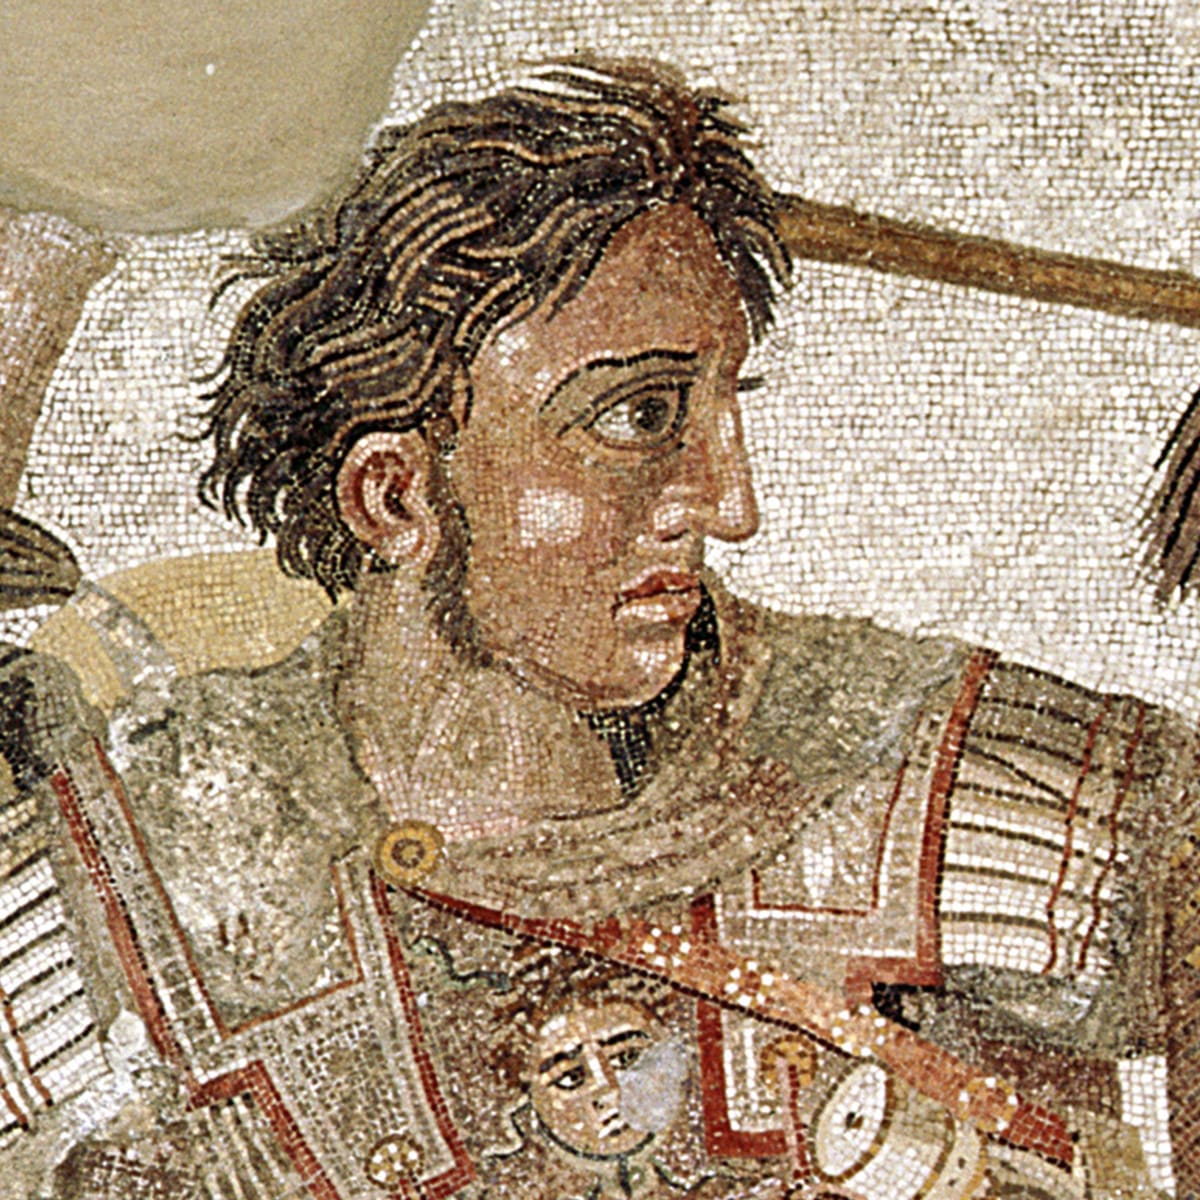 alexander-the-great-gettyimages-501580105.jpg